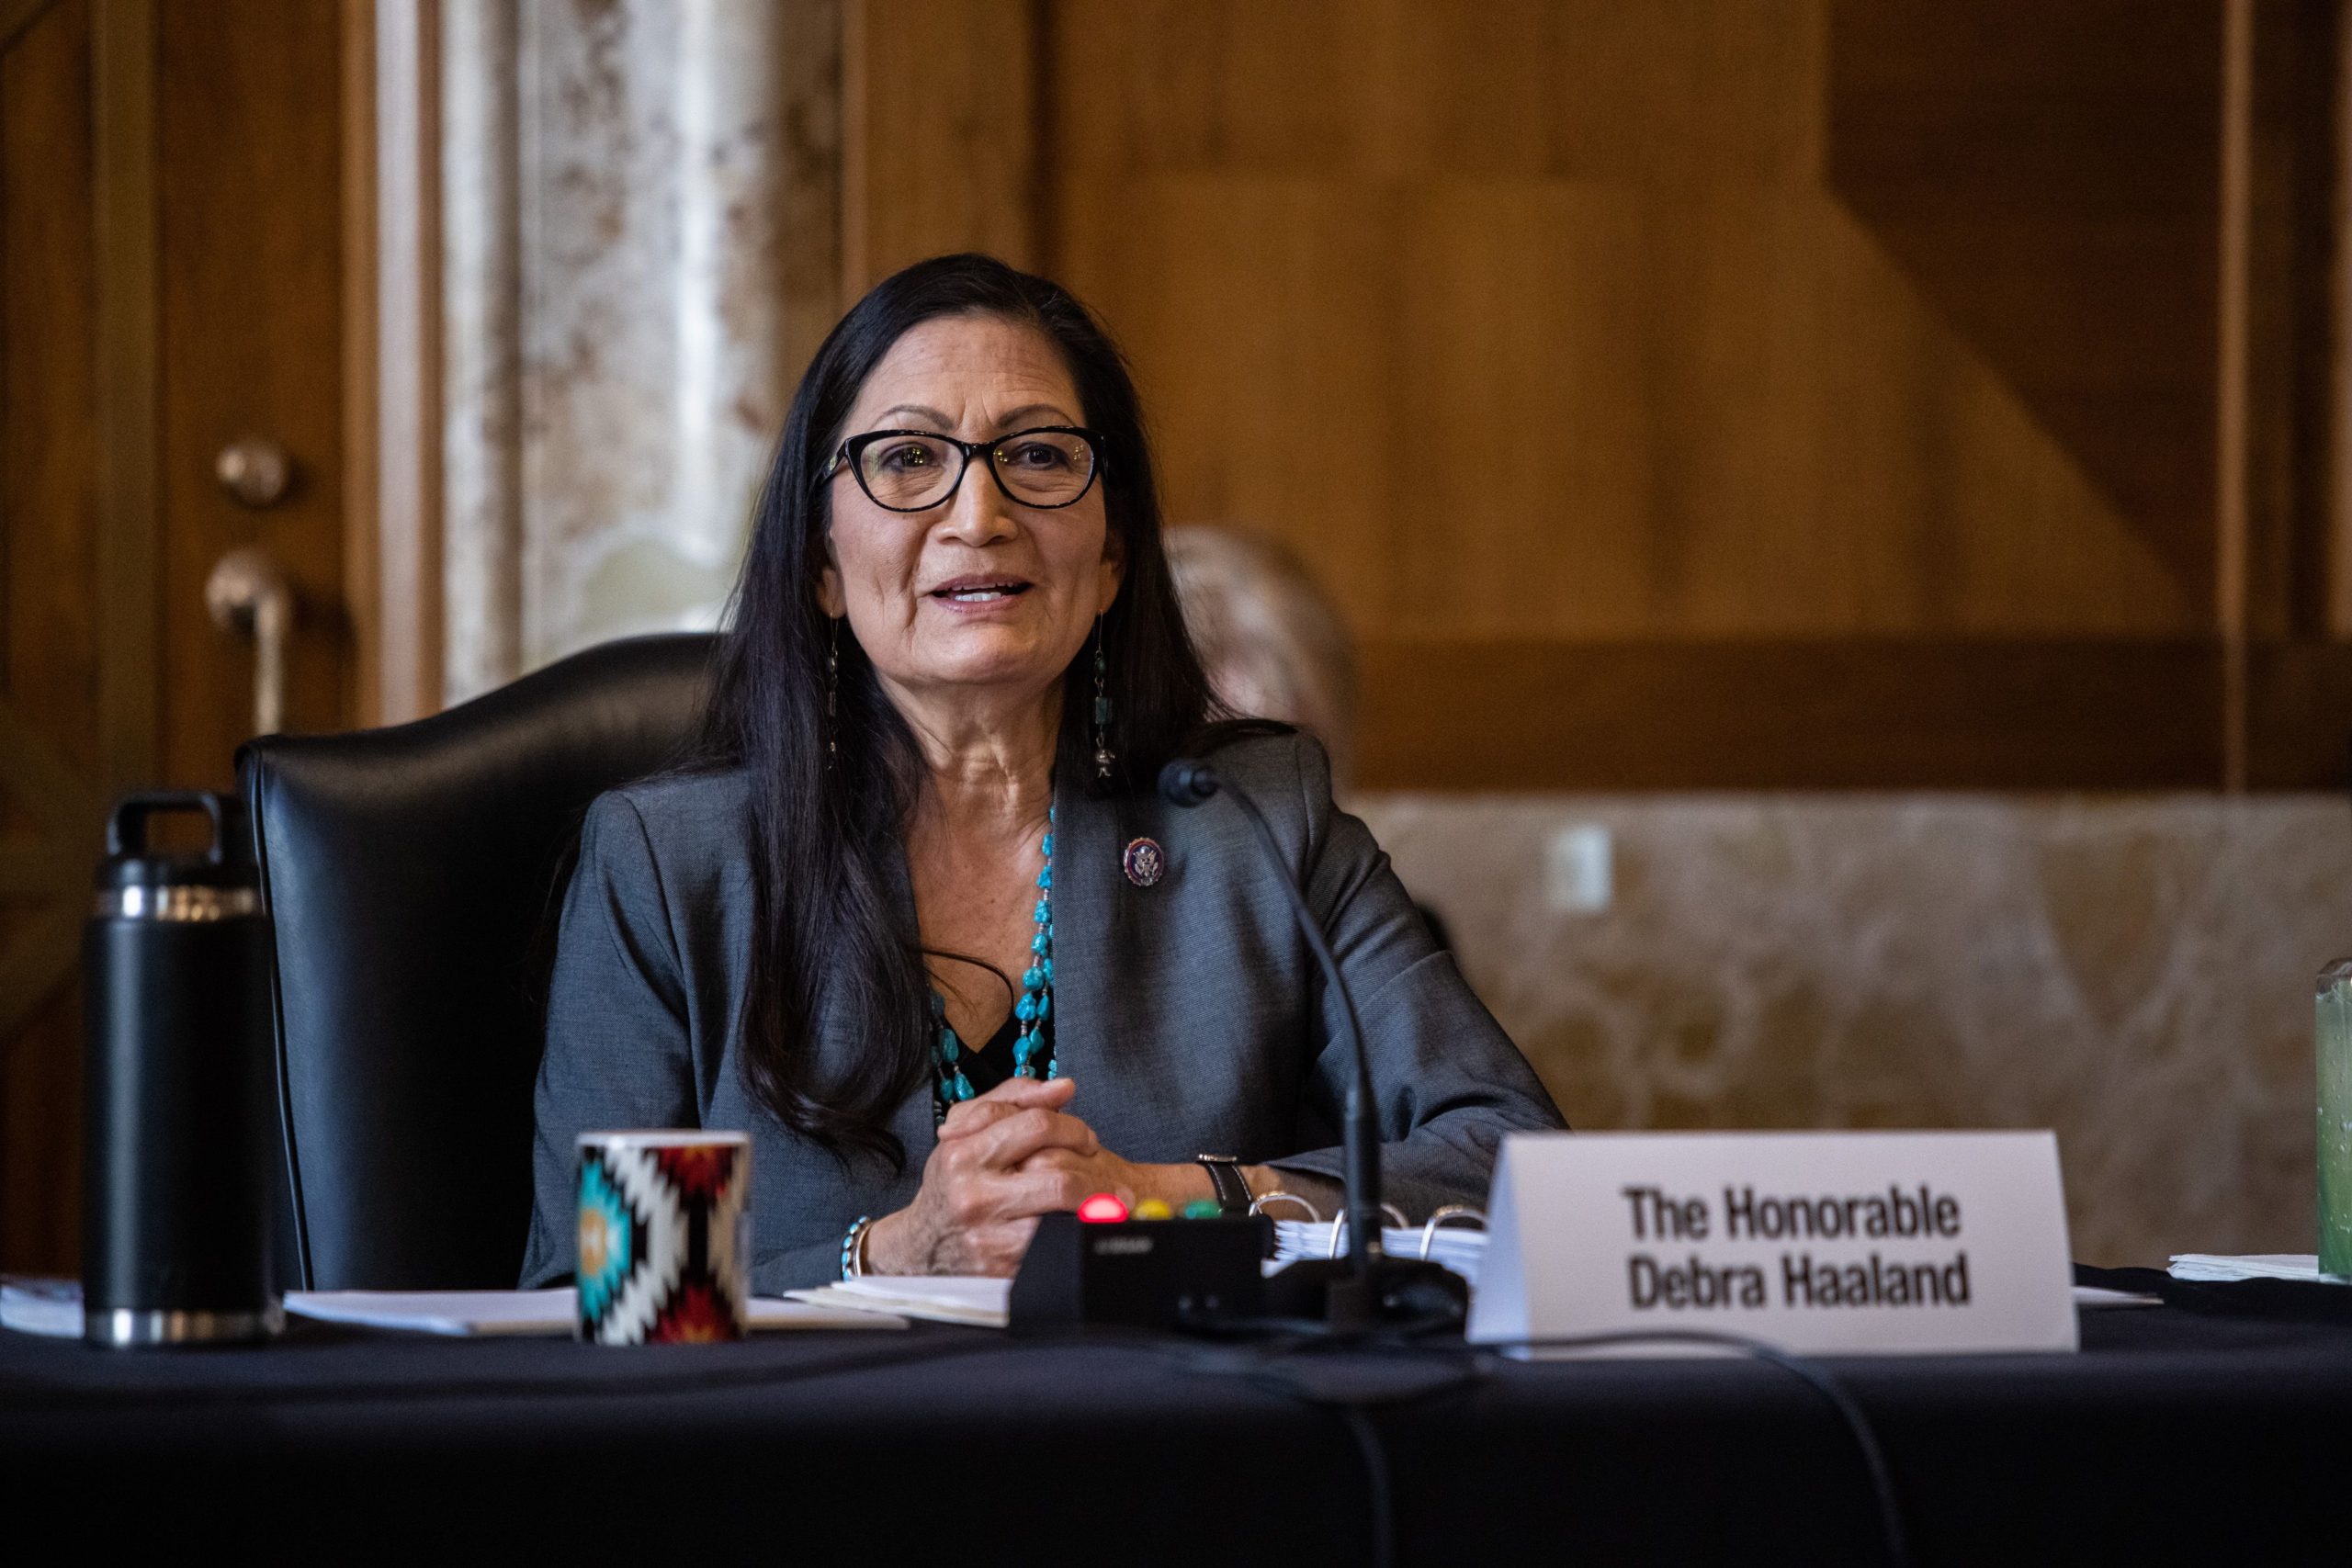 Haaland questioned by Senate committee in confirmation hearing